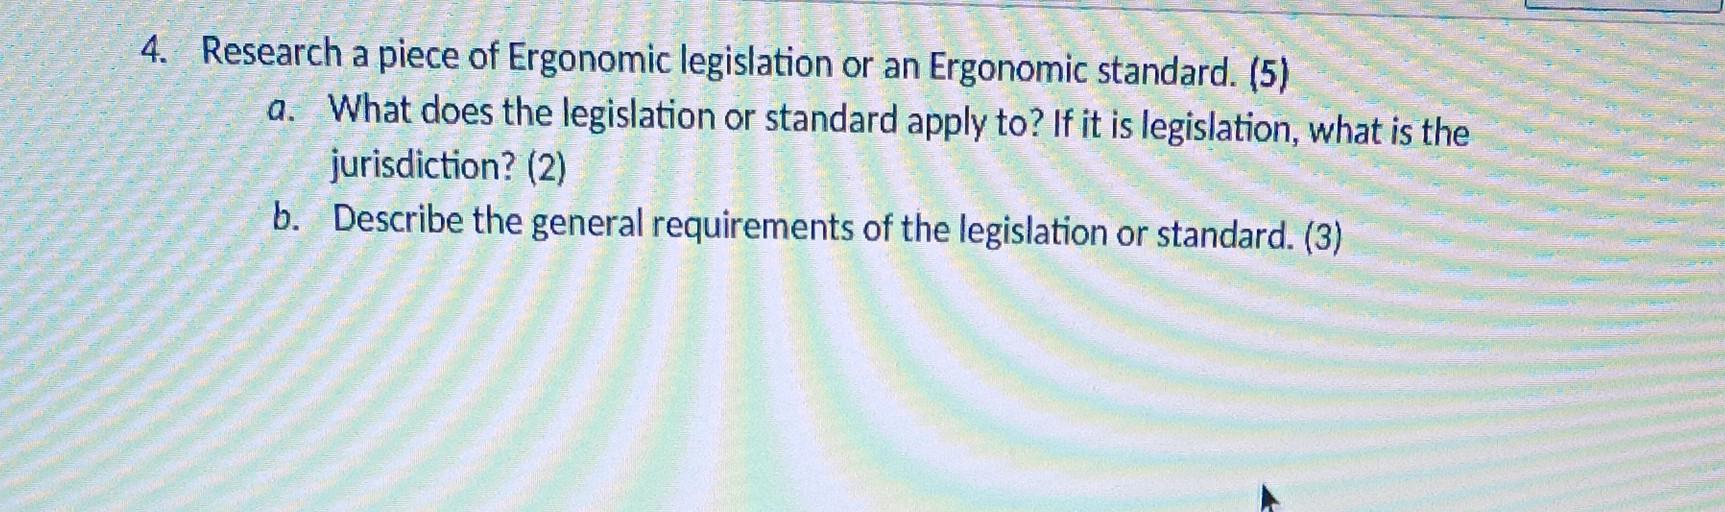 4. Research a piece of Ergonomic legislation or an Ergonomic standard. (5)a. What does the legislation or standard apply to?